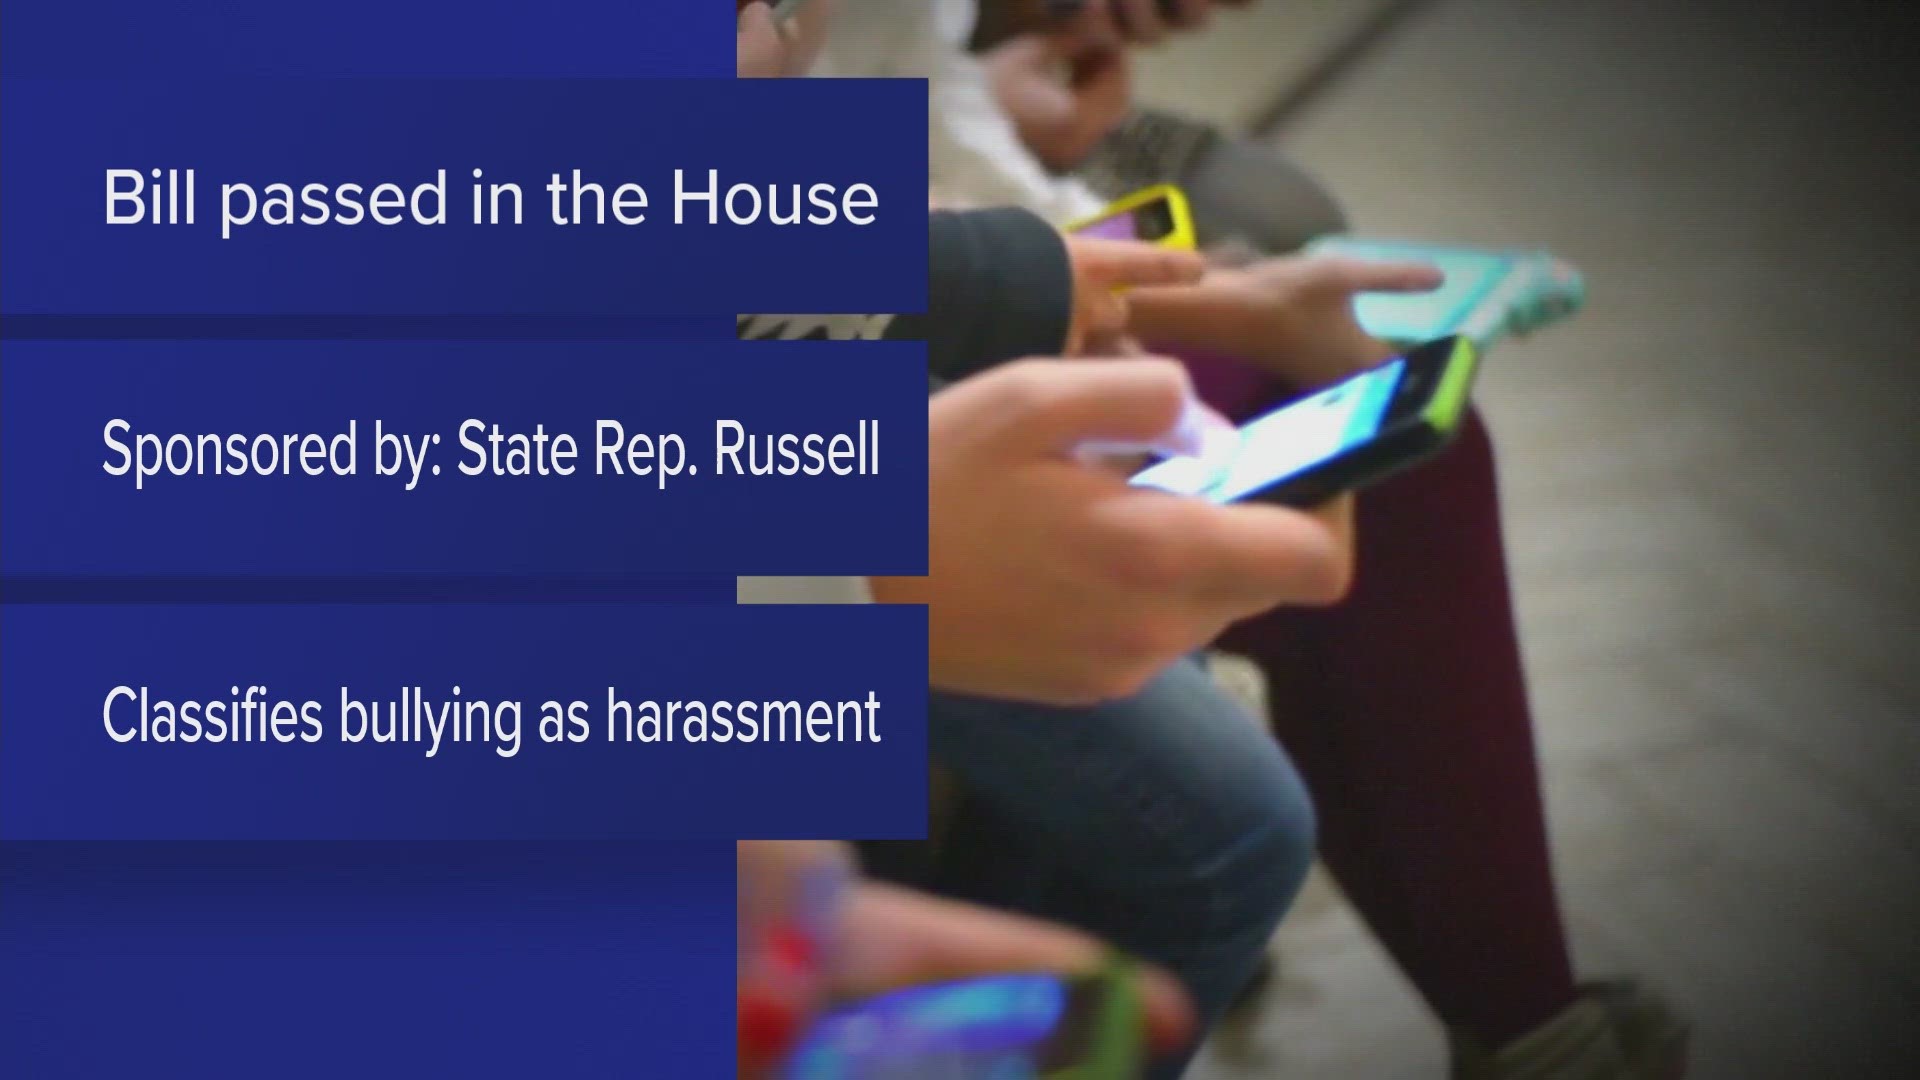 HB 2590 would add language about bullying and cyberbullying to the state's law about threats and harassment.